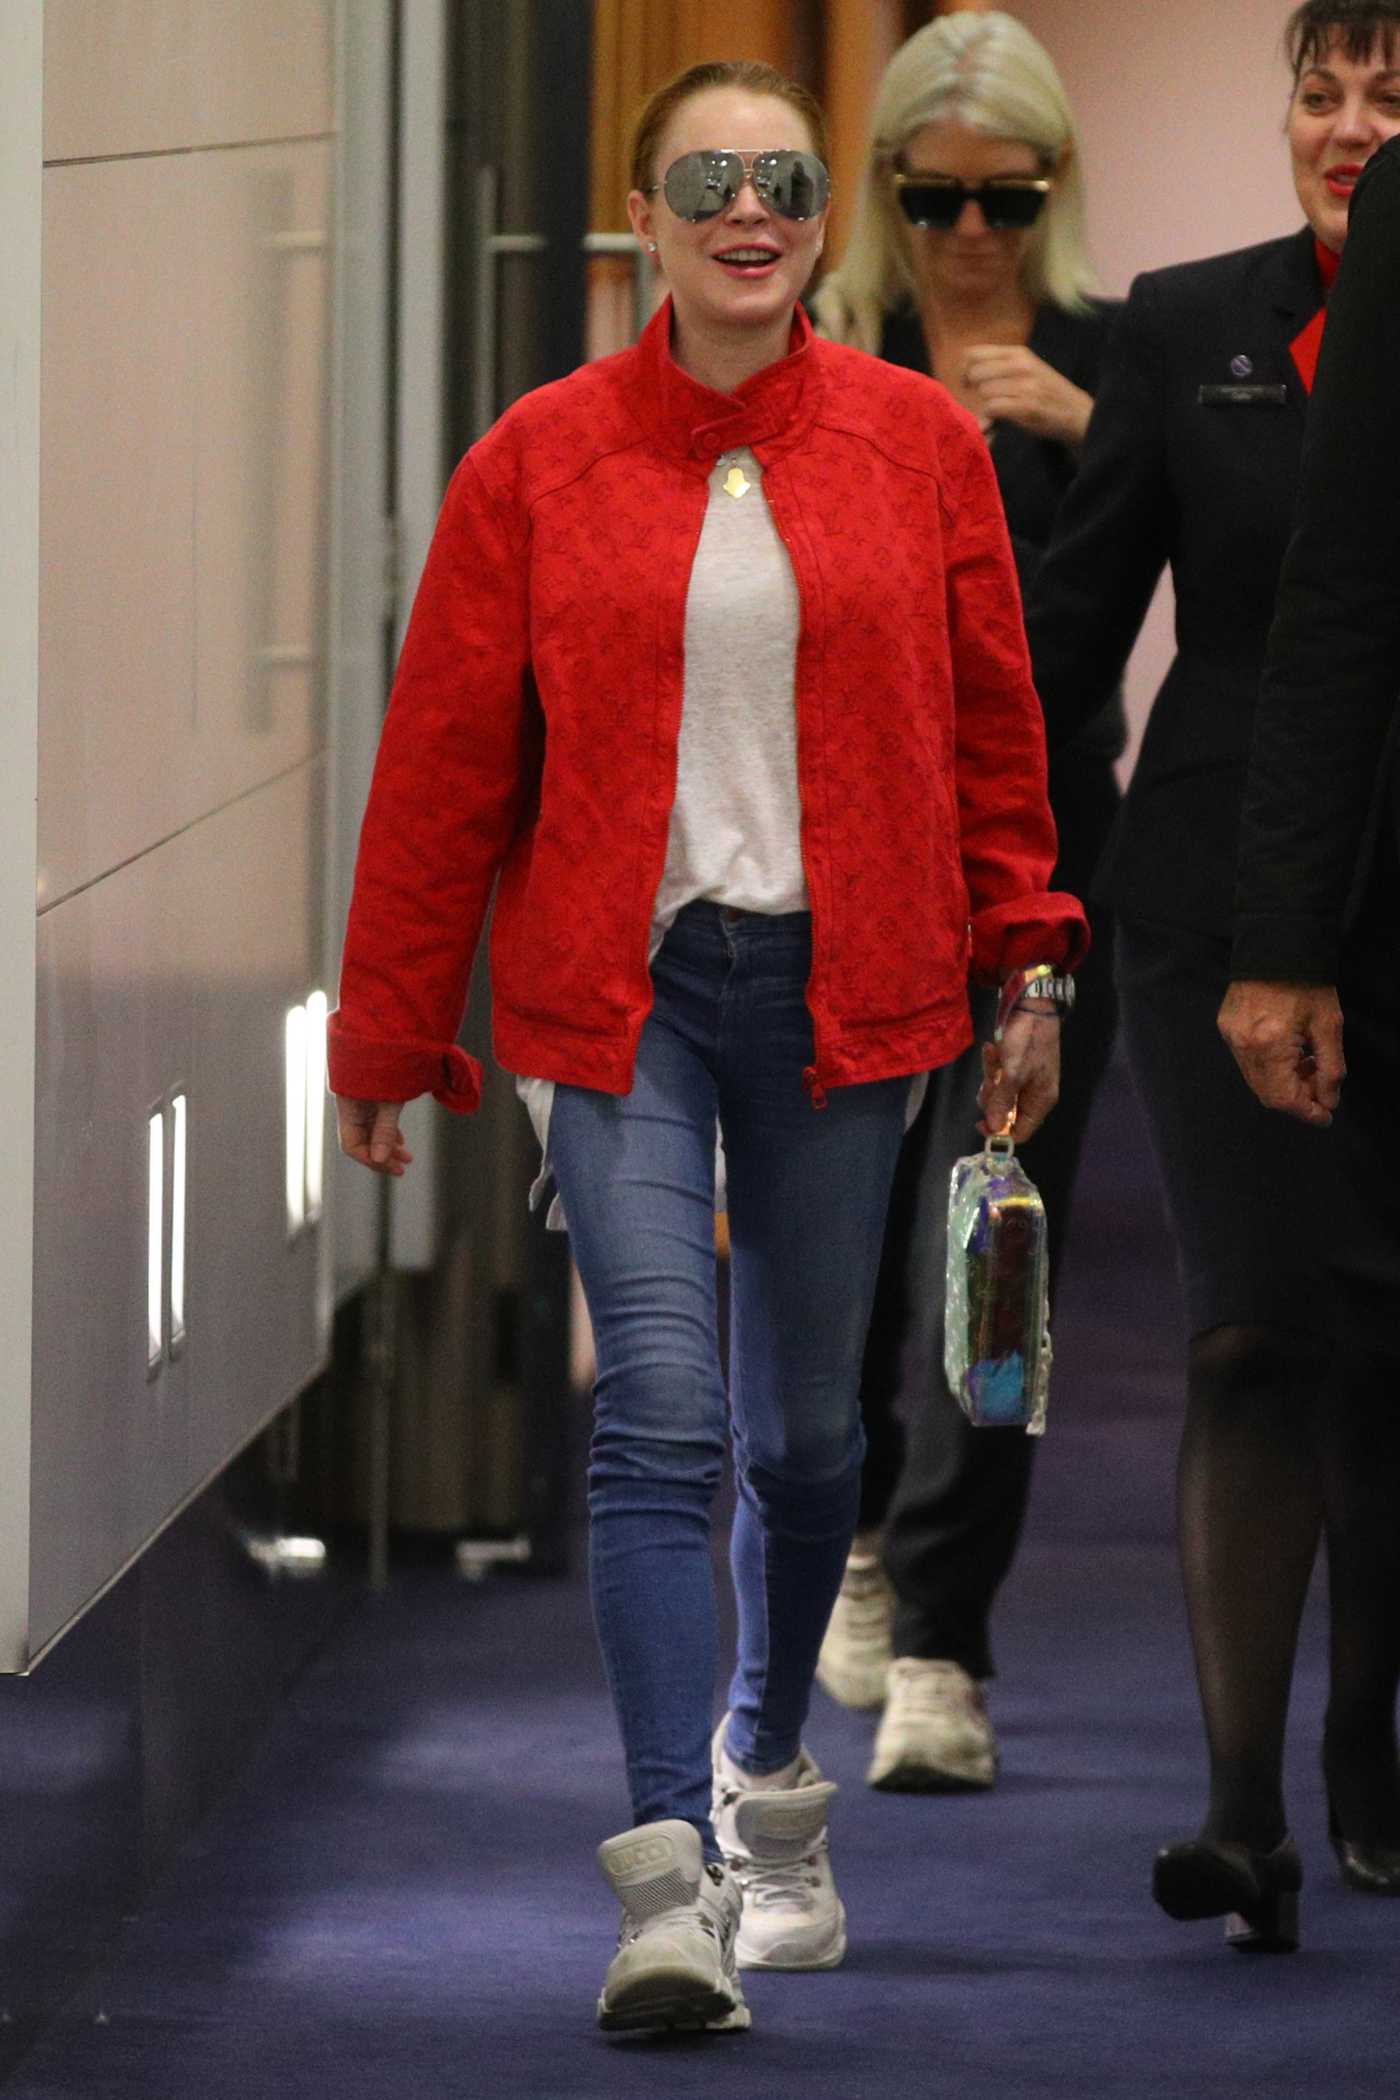 Lindsay Lohan in a Red Jacket Arrives at JA Douglas McCurdy Airport in Sydney 07/17/2019